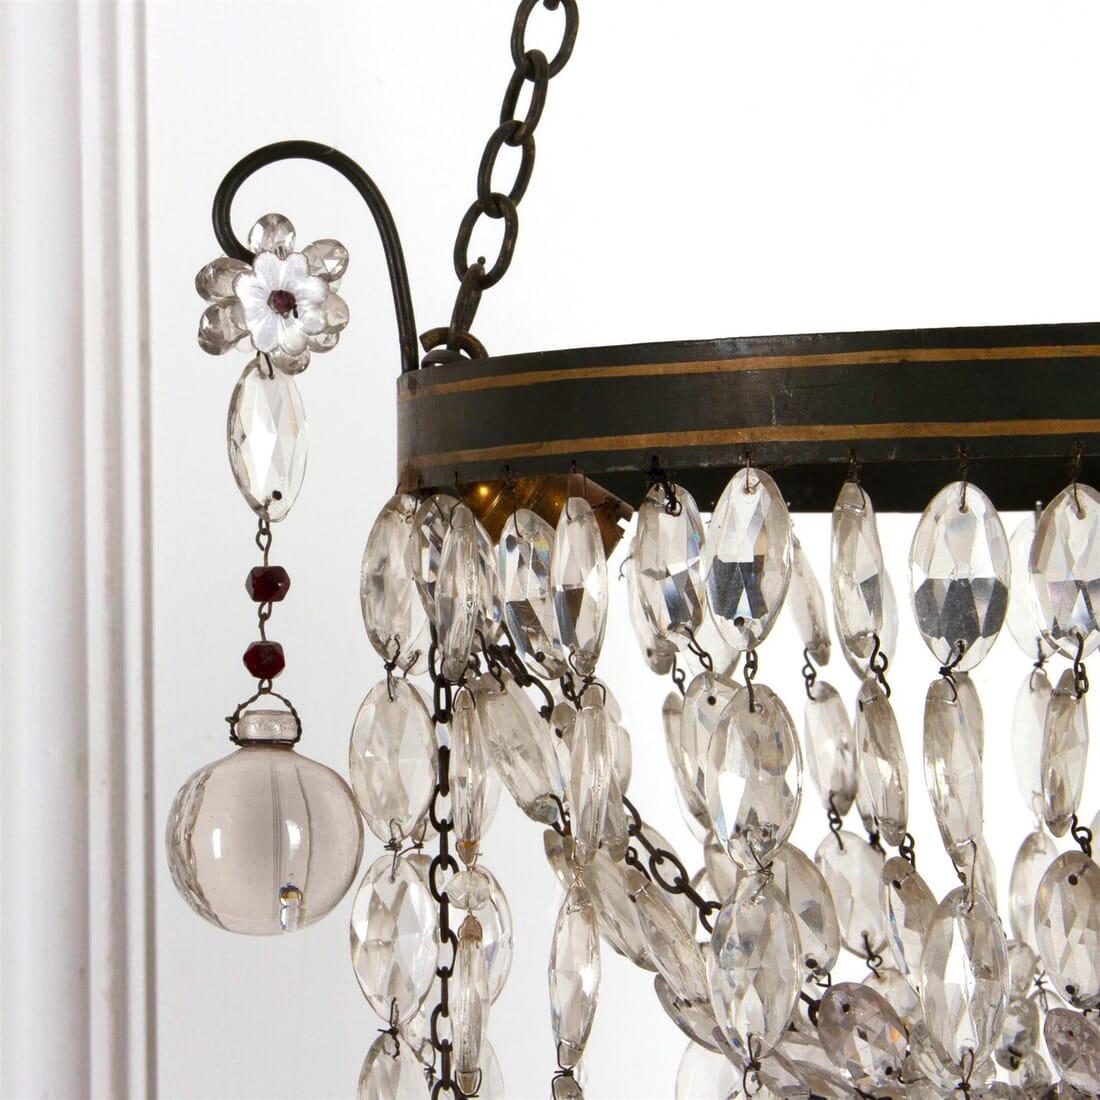 A very decorative late 19th century Italian tole and glass pendant light.
 
Measures: Height including chain is 160cm.